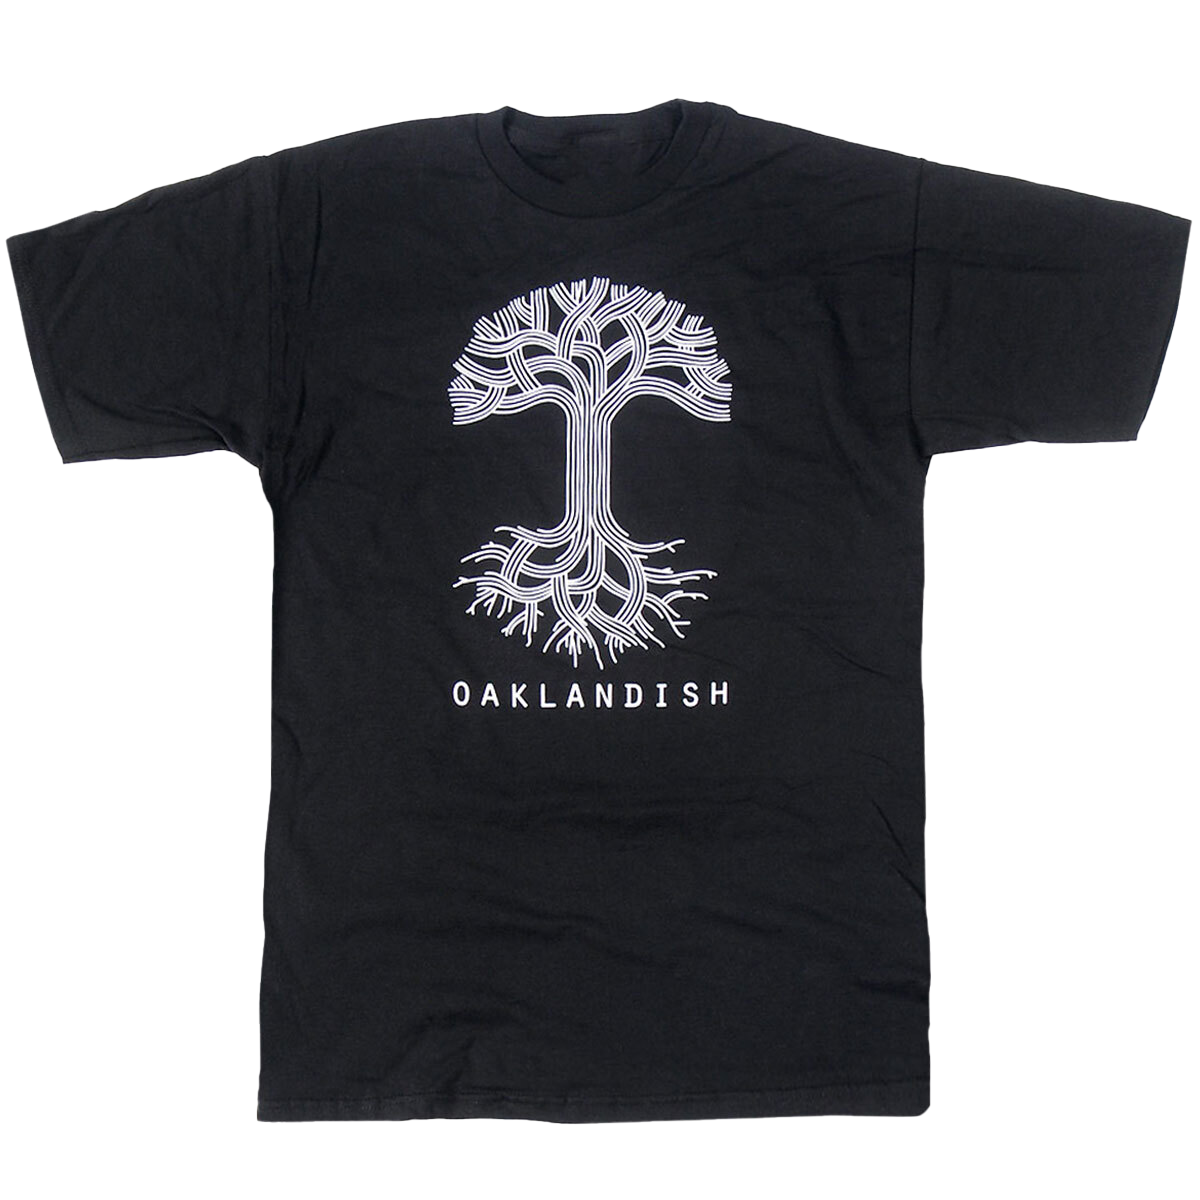 Black t-shirt with a large white Oaklandish tree logo and wordmark on the front chest.